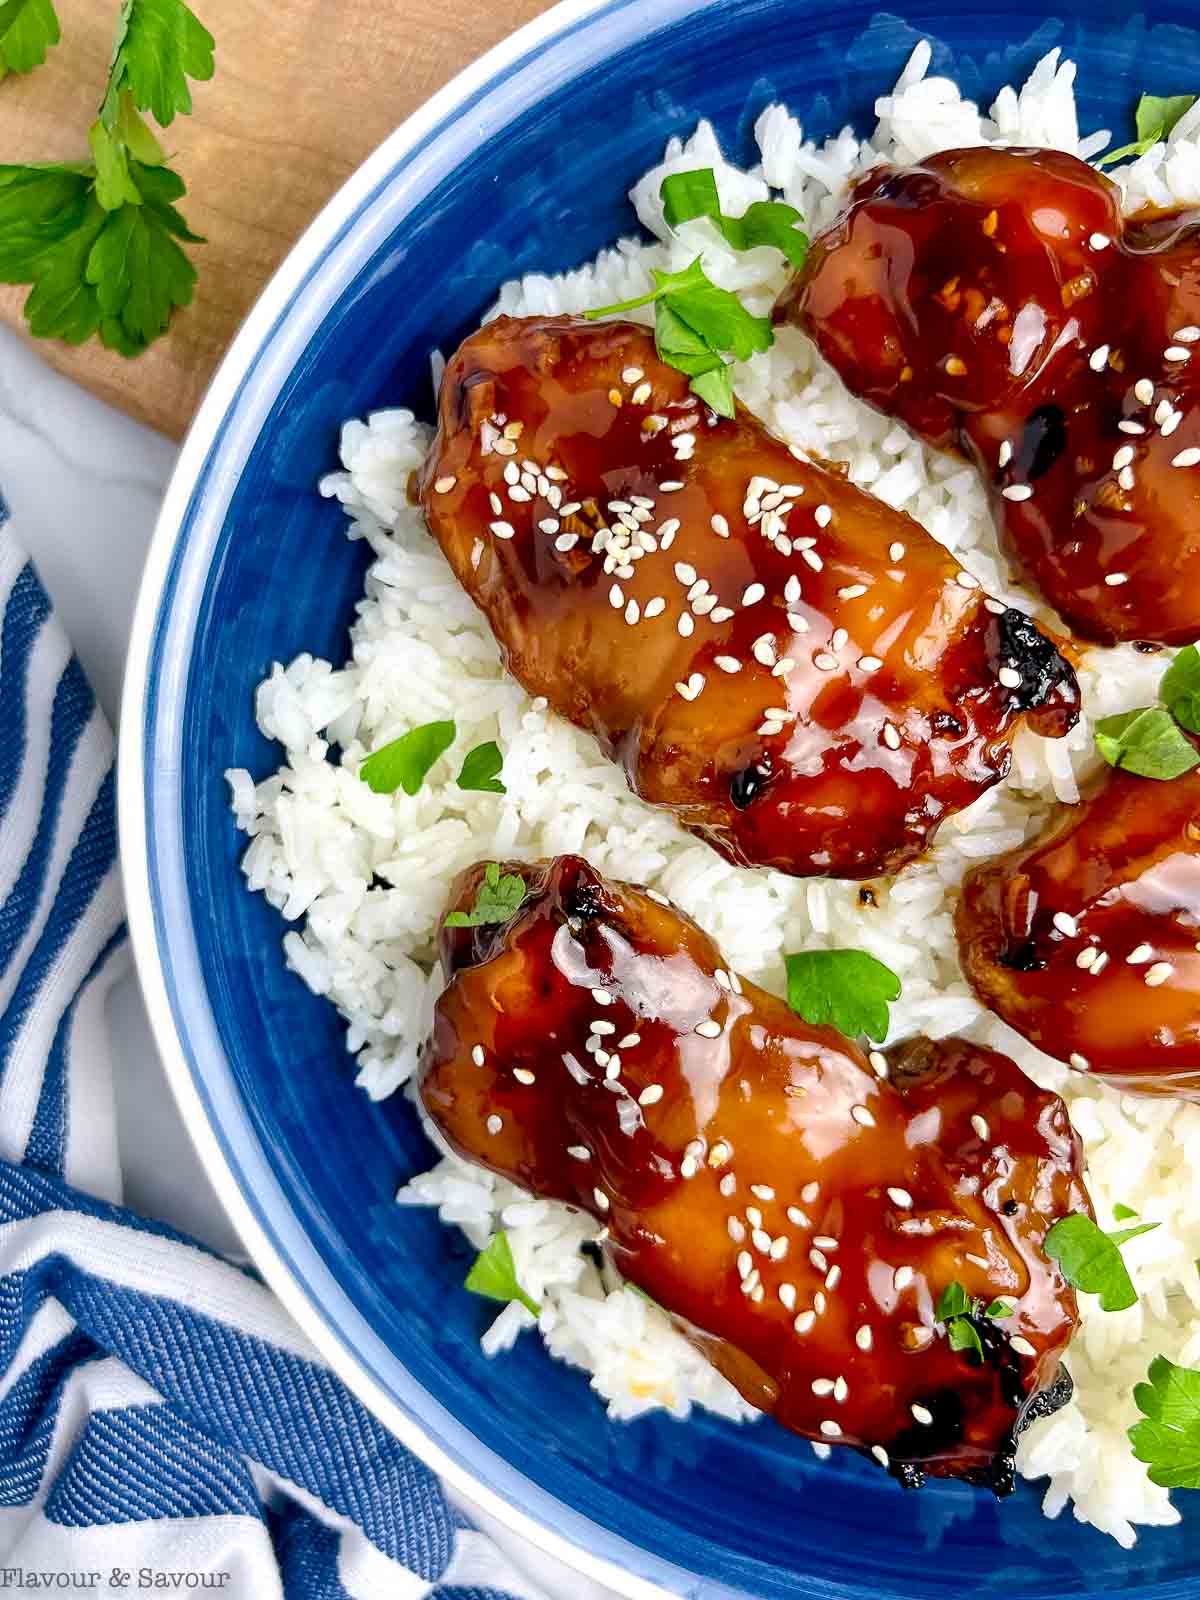 Teriyaki chicken thighs brushed with teriyaki glaze in a bowl with rice.